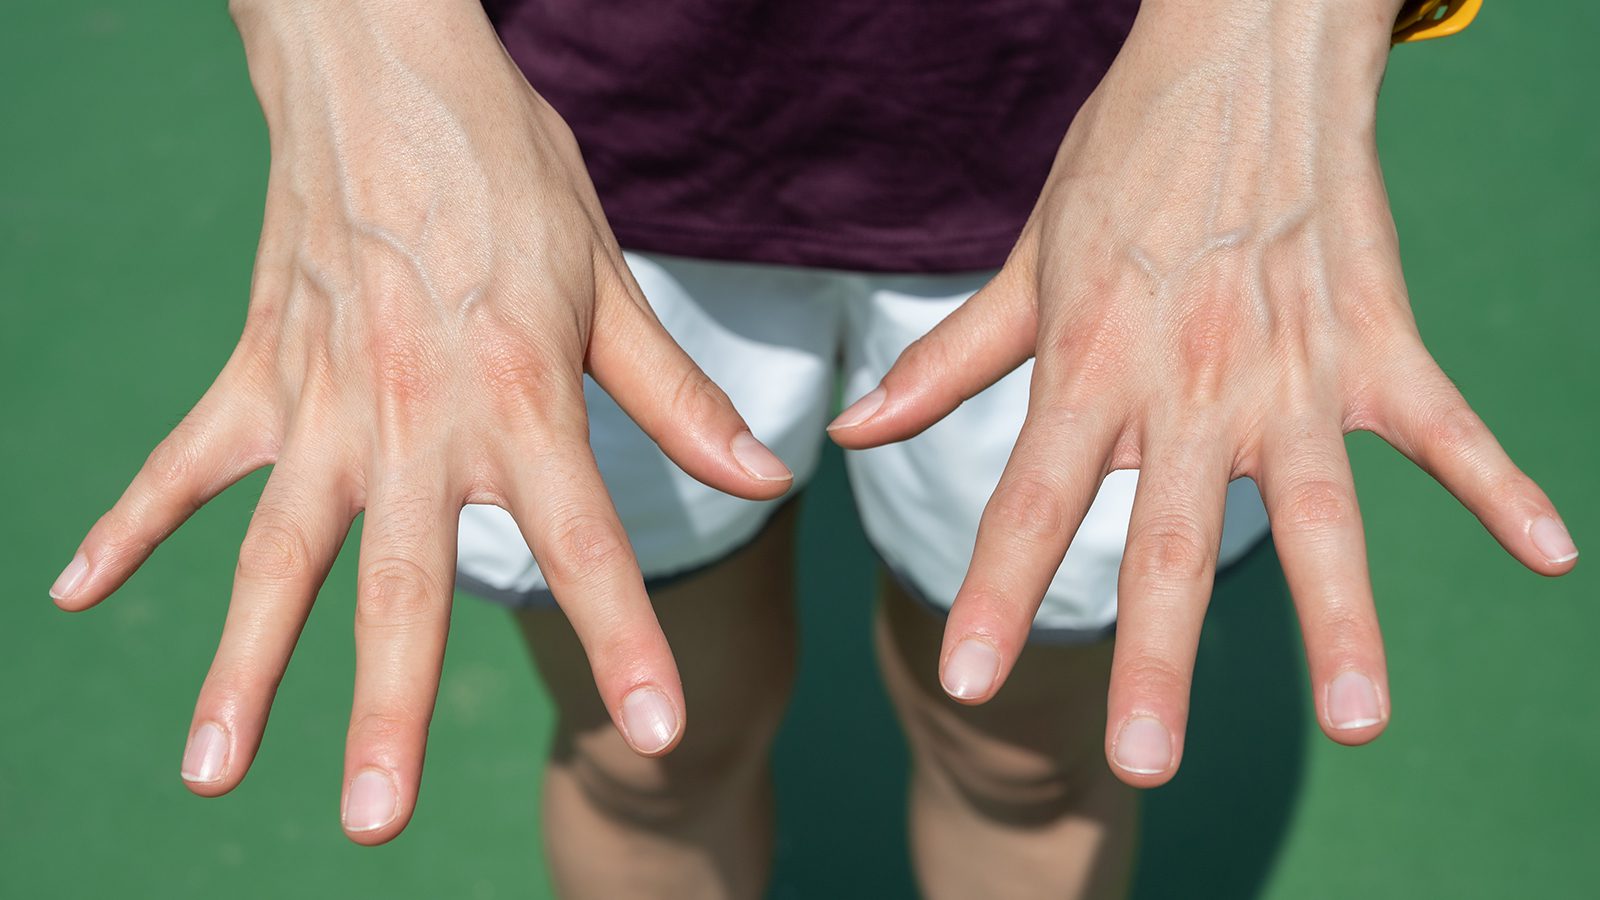 Doctors Explain What Veiny Hands Reveal About Your Health